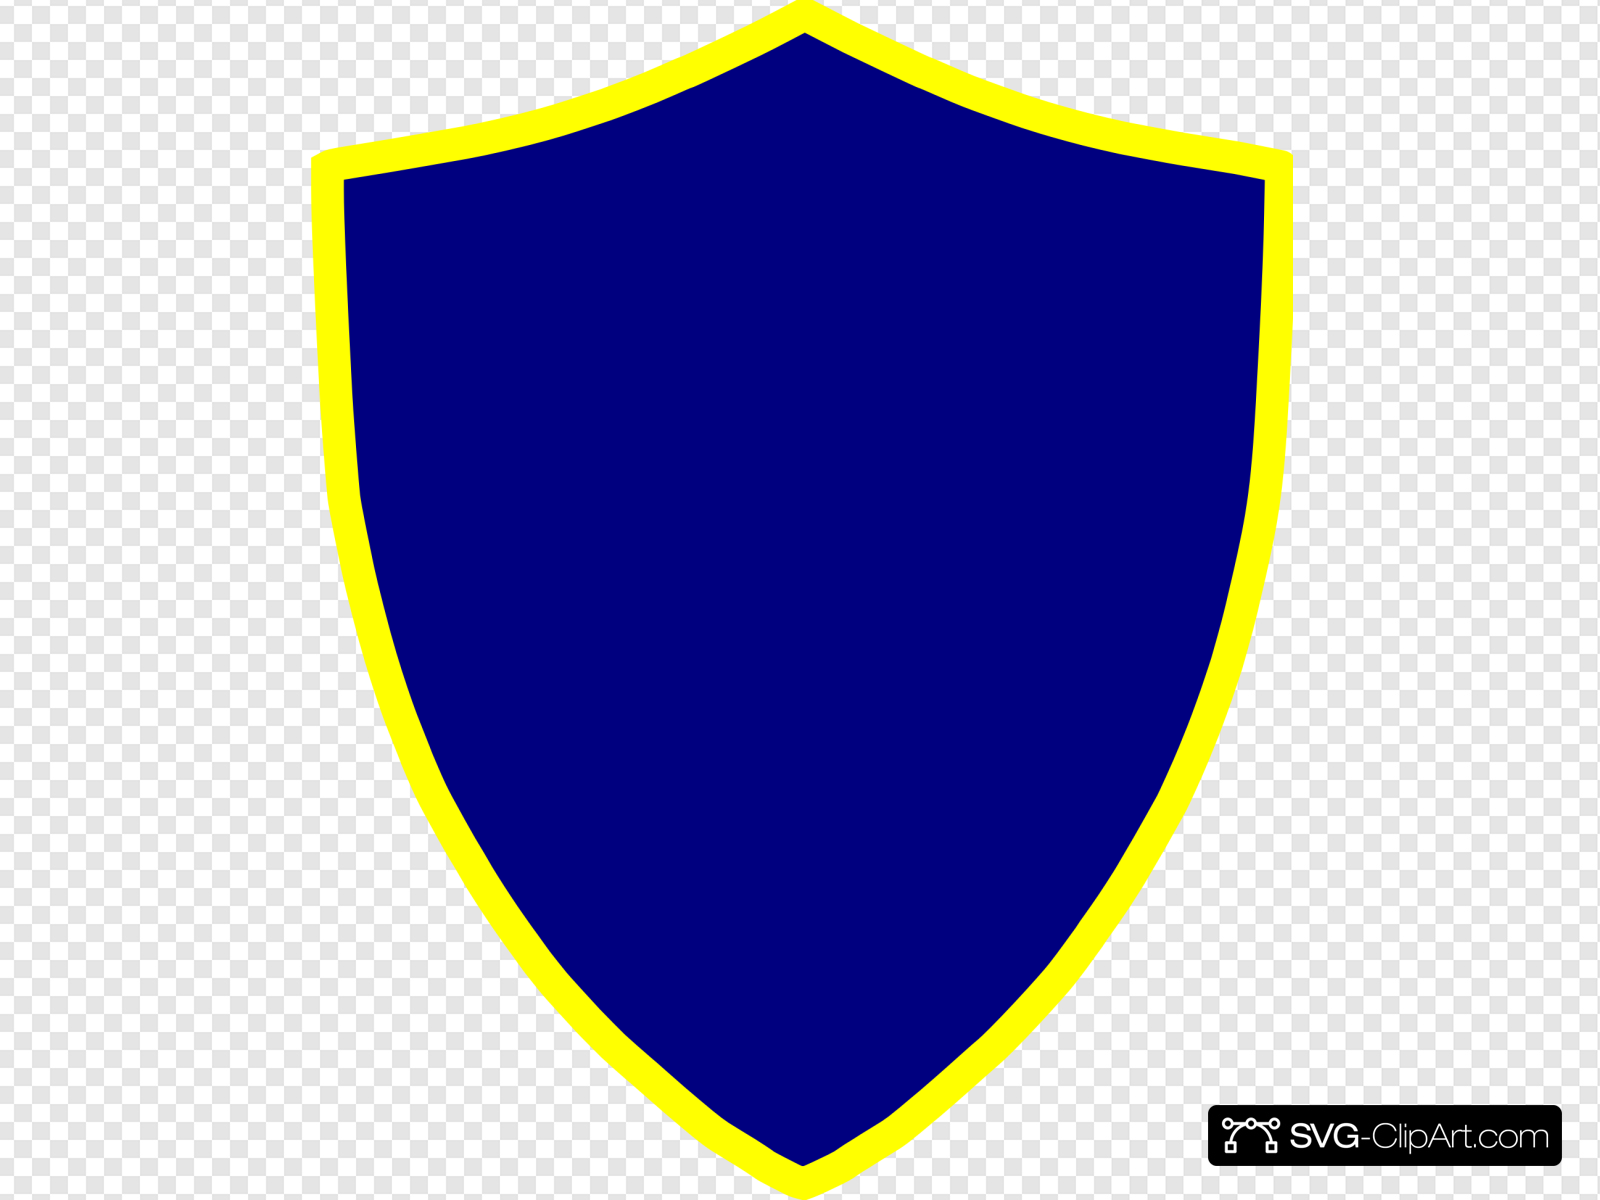 Blue And Yellow Shield Clip art, Icon and SVG